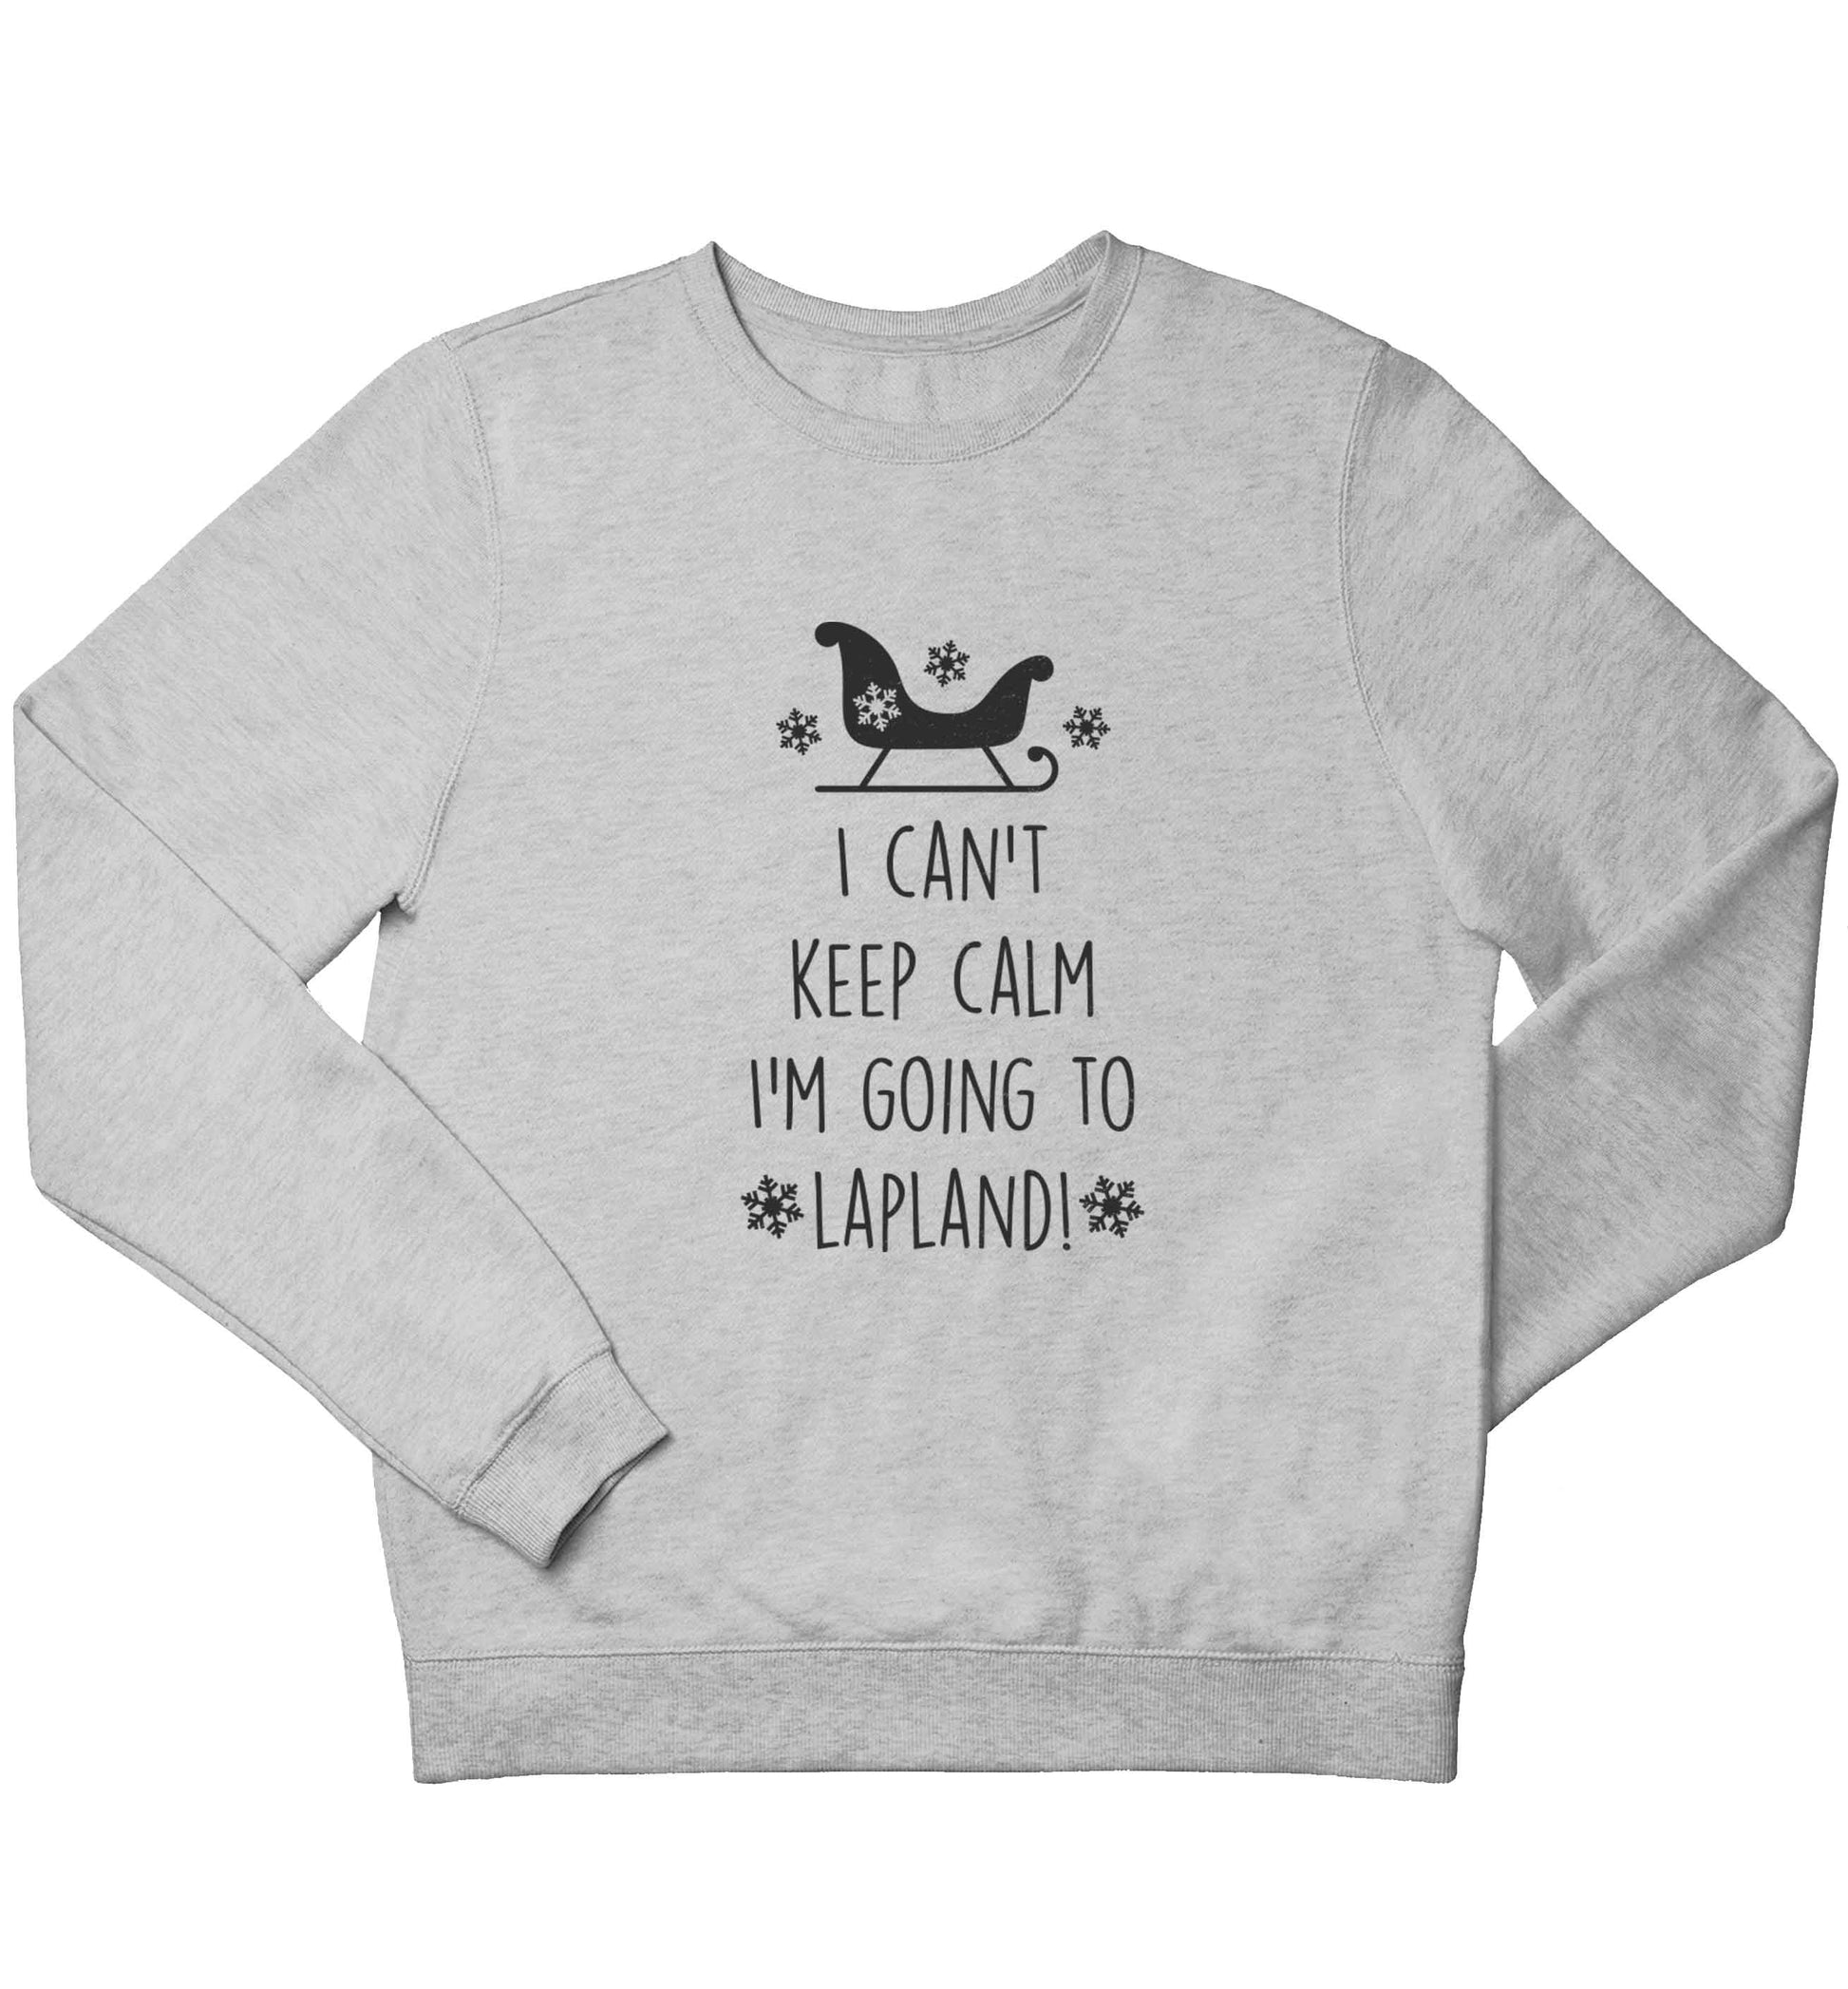 I can't keep calm I'm going to Lapland children's grey sweater 12-13 Years